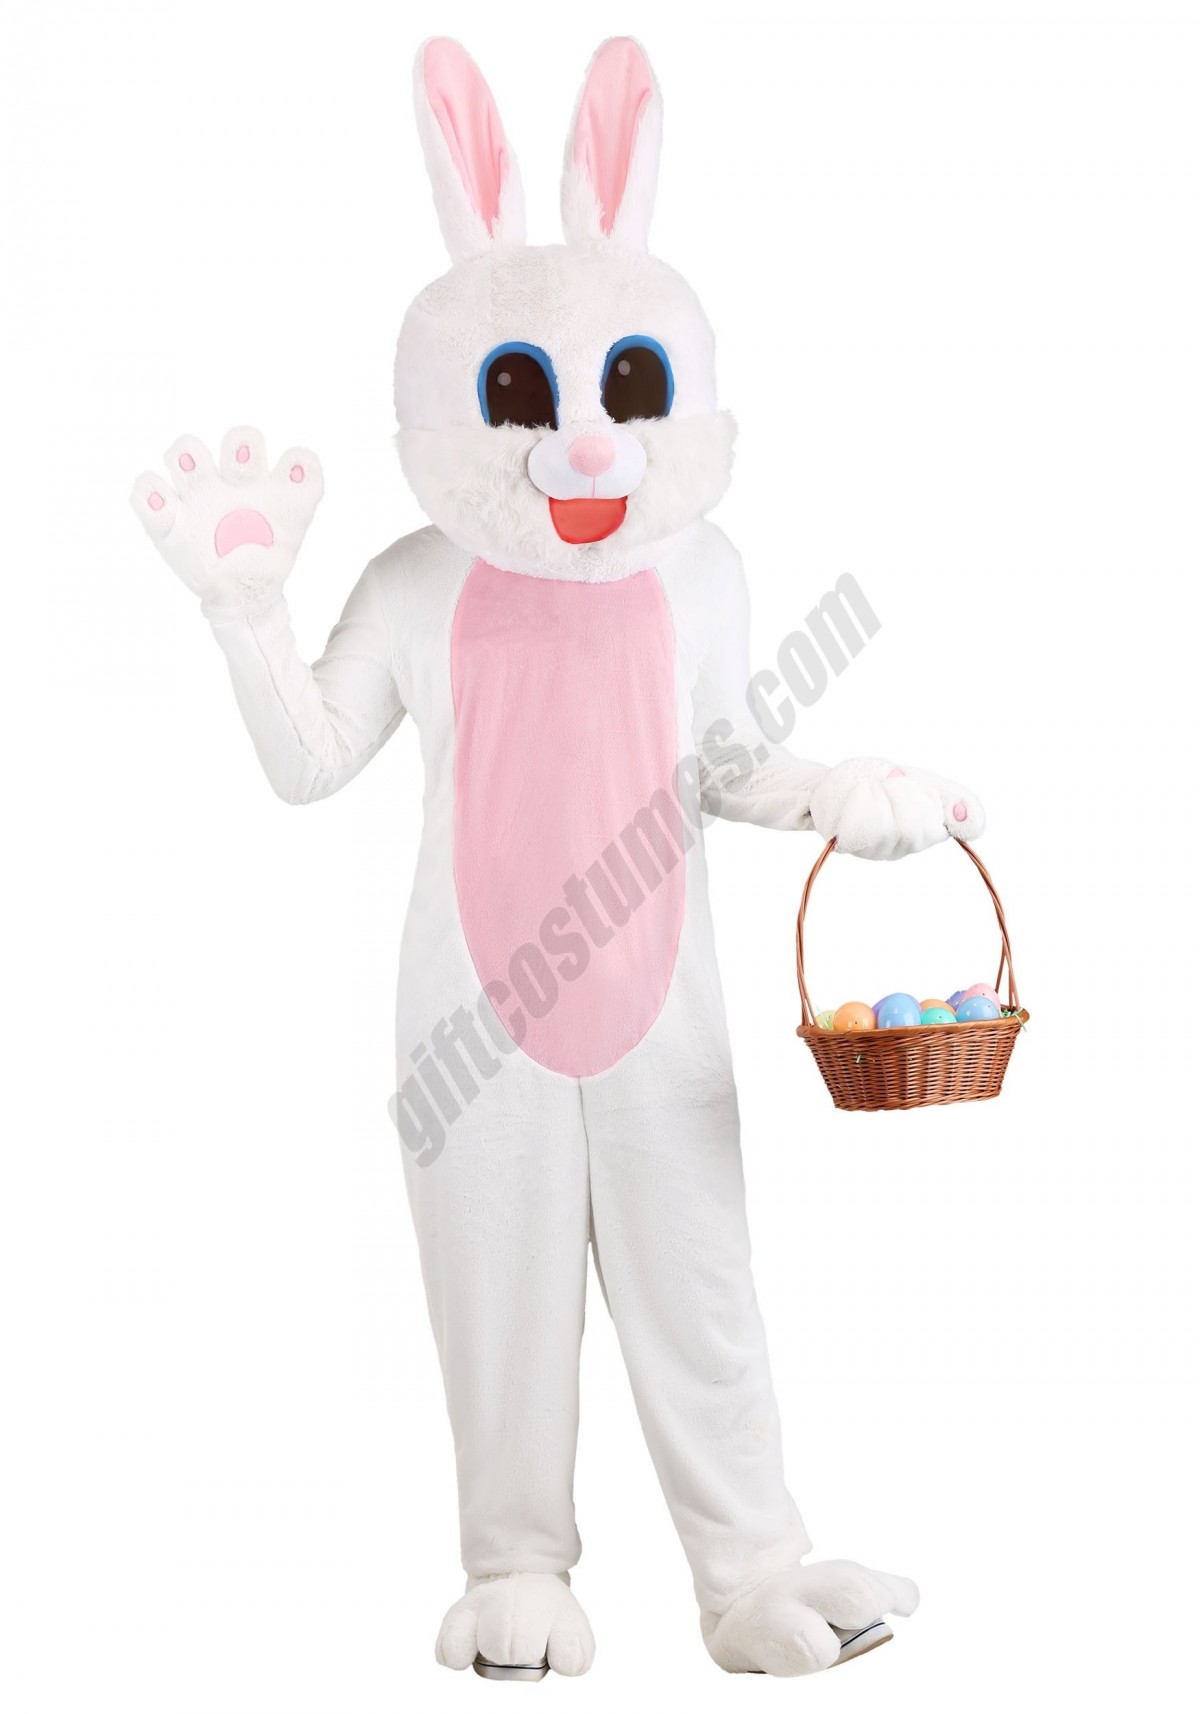 Adult Plus Size Mascot Easter Bunny Costume Promotions - -0